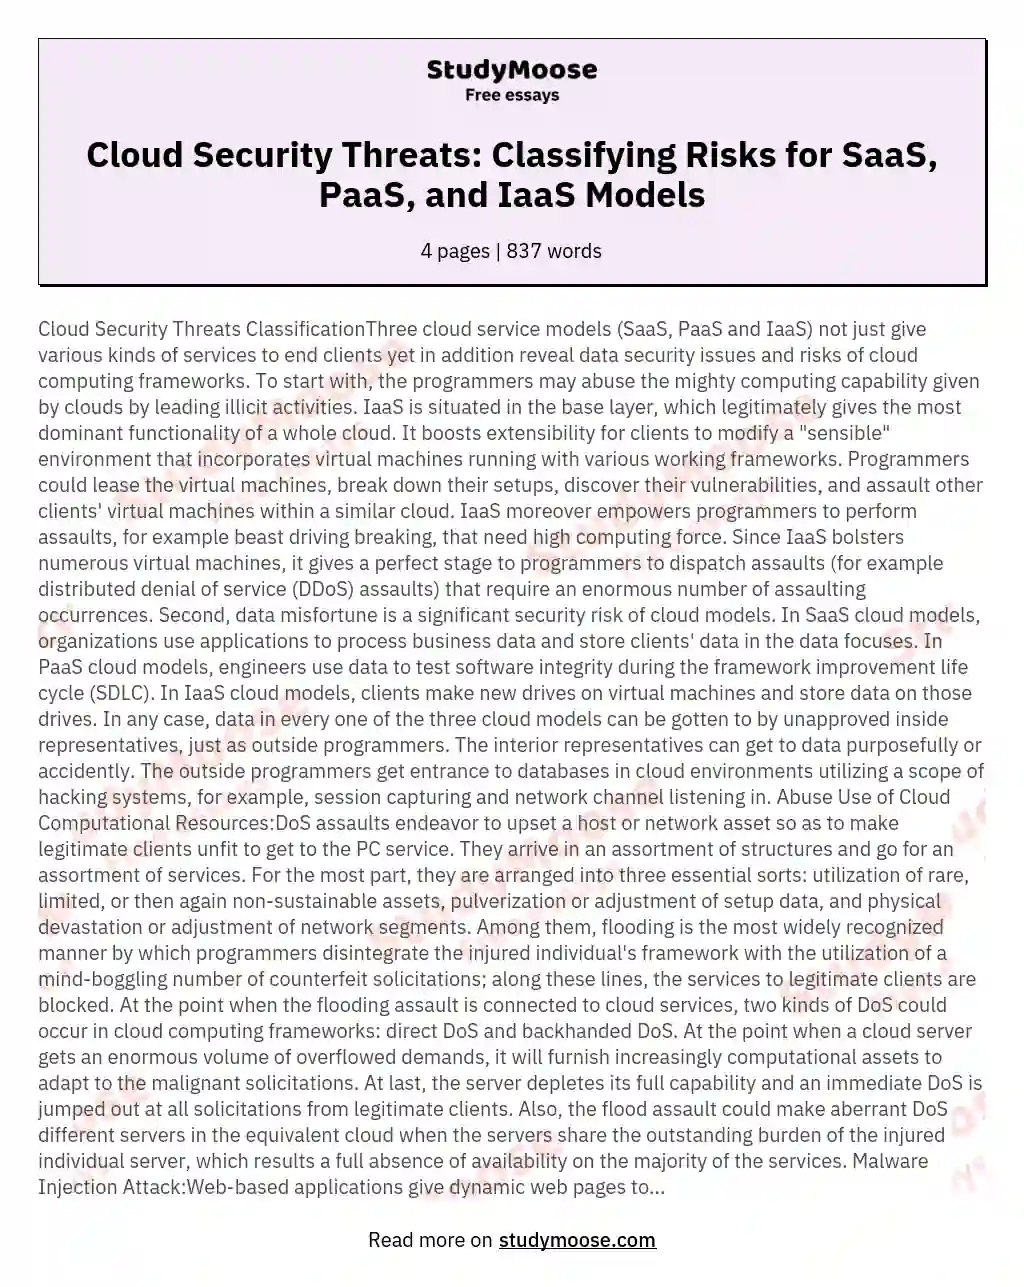 Cloud Security Threats ClassificationThree cloud service models SaaS PaaS and IaaS not